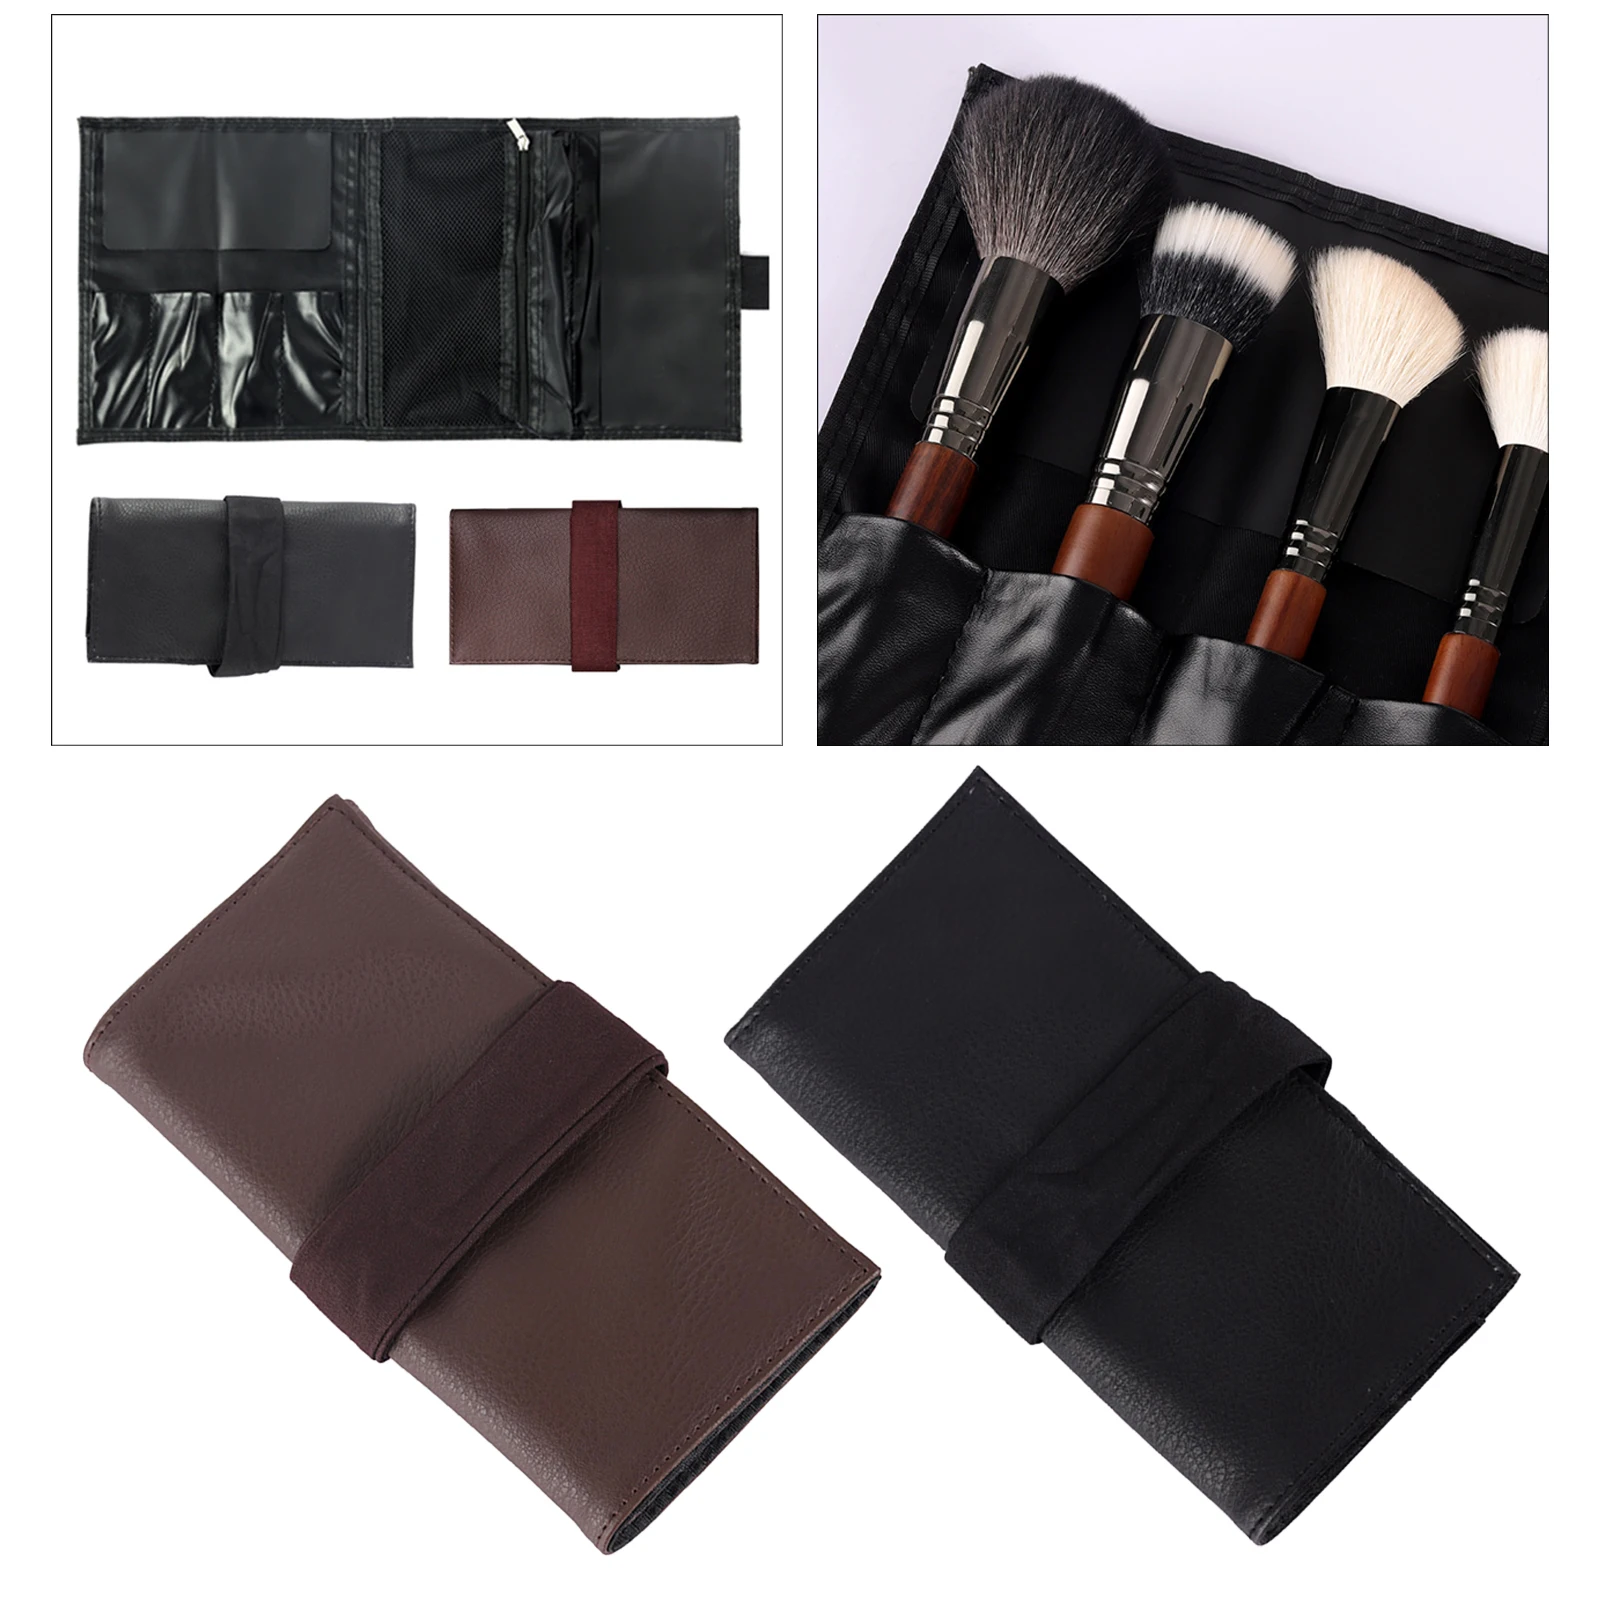 Makeup PU Leather Foldable Holder Organizer for Travel Artists